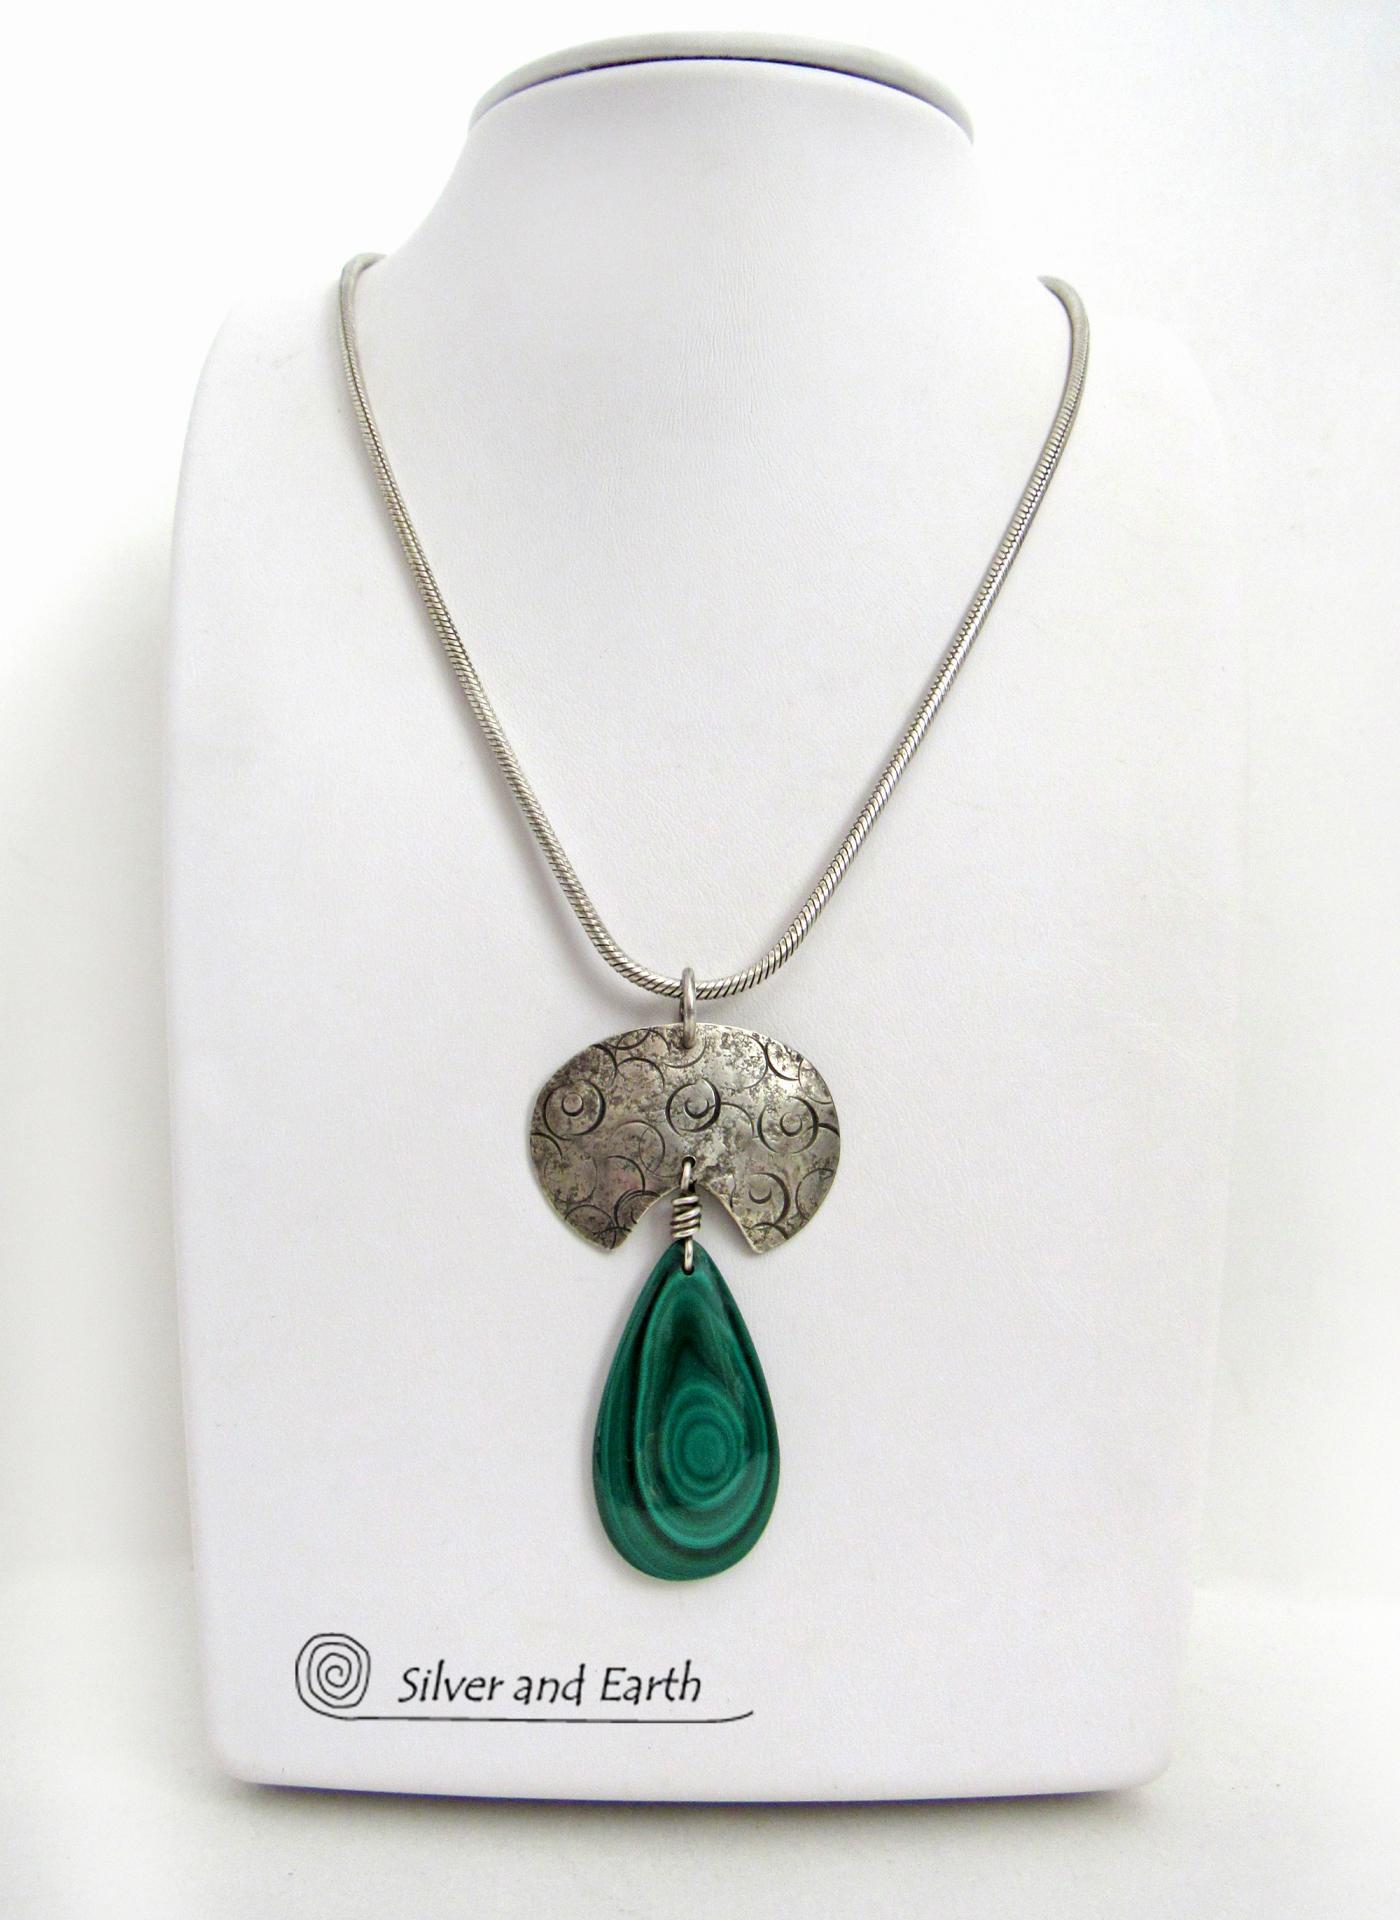 Green Malachite Gemstone Sterling Silver Necklace - Unique One of a Kind Modern Natural Stone Jewelry